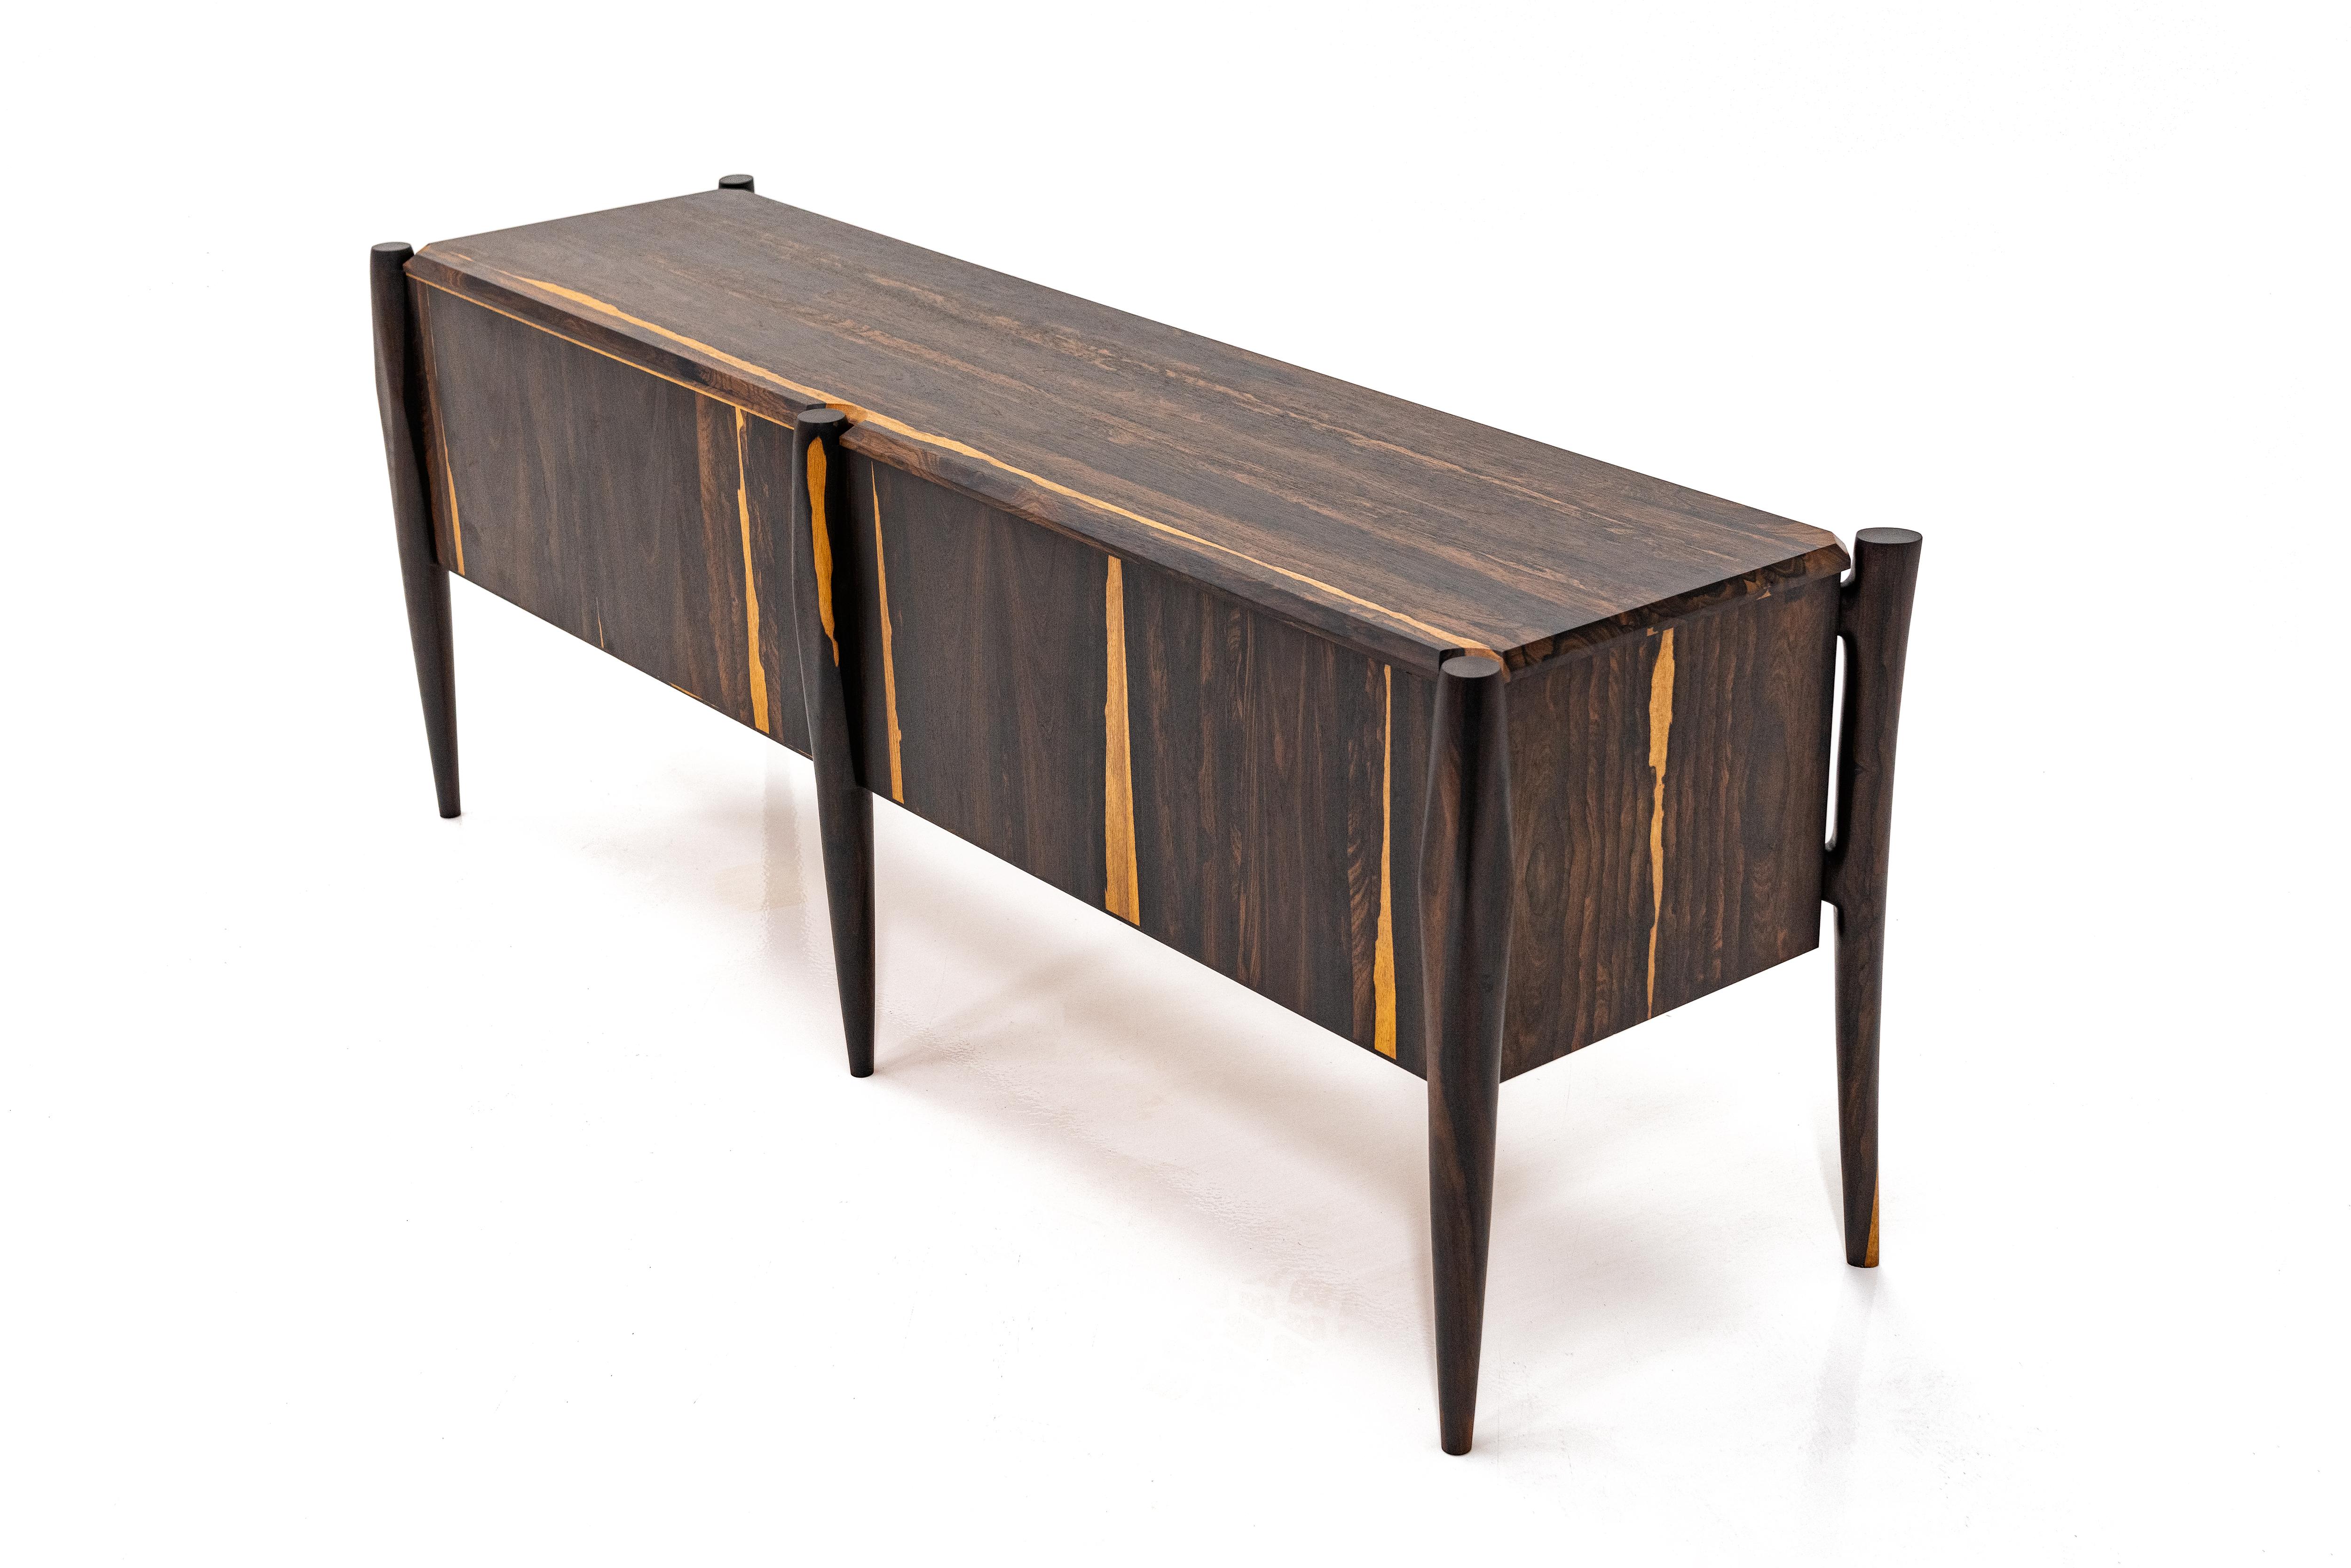 Modern credenza with hand turned legs. Available in other wood species.